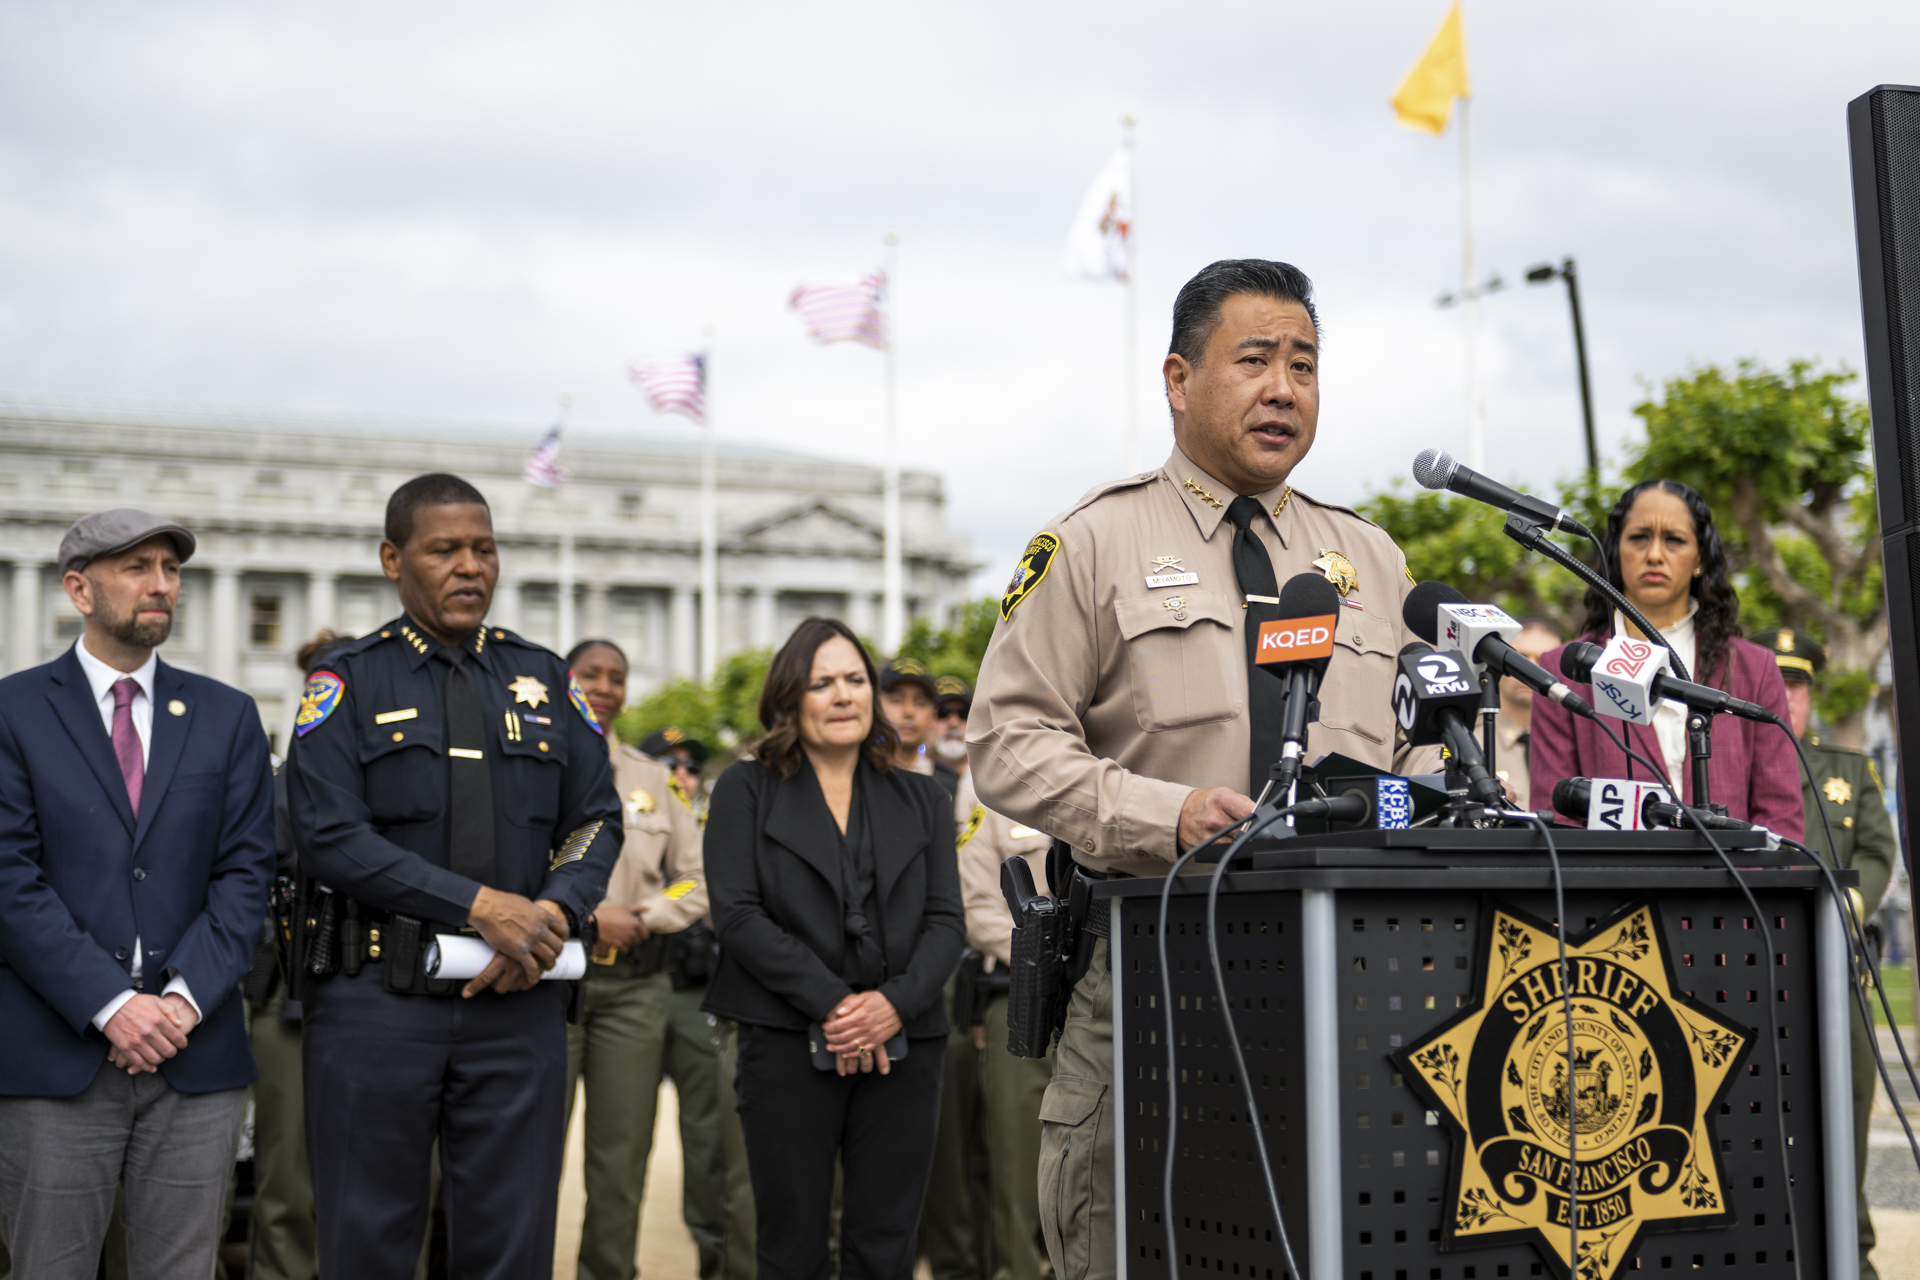 A man in an official uniform with a starred badge pinned to it speaks into an array of microphones from an outdoor lectern, flanked by law enforcement officers and others.